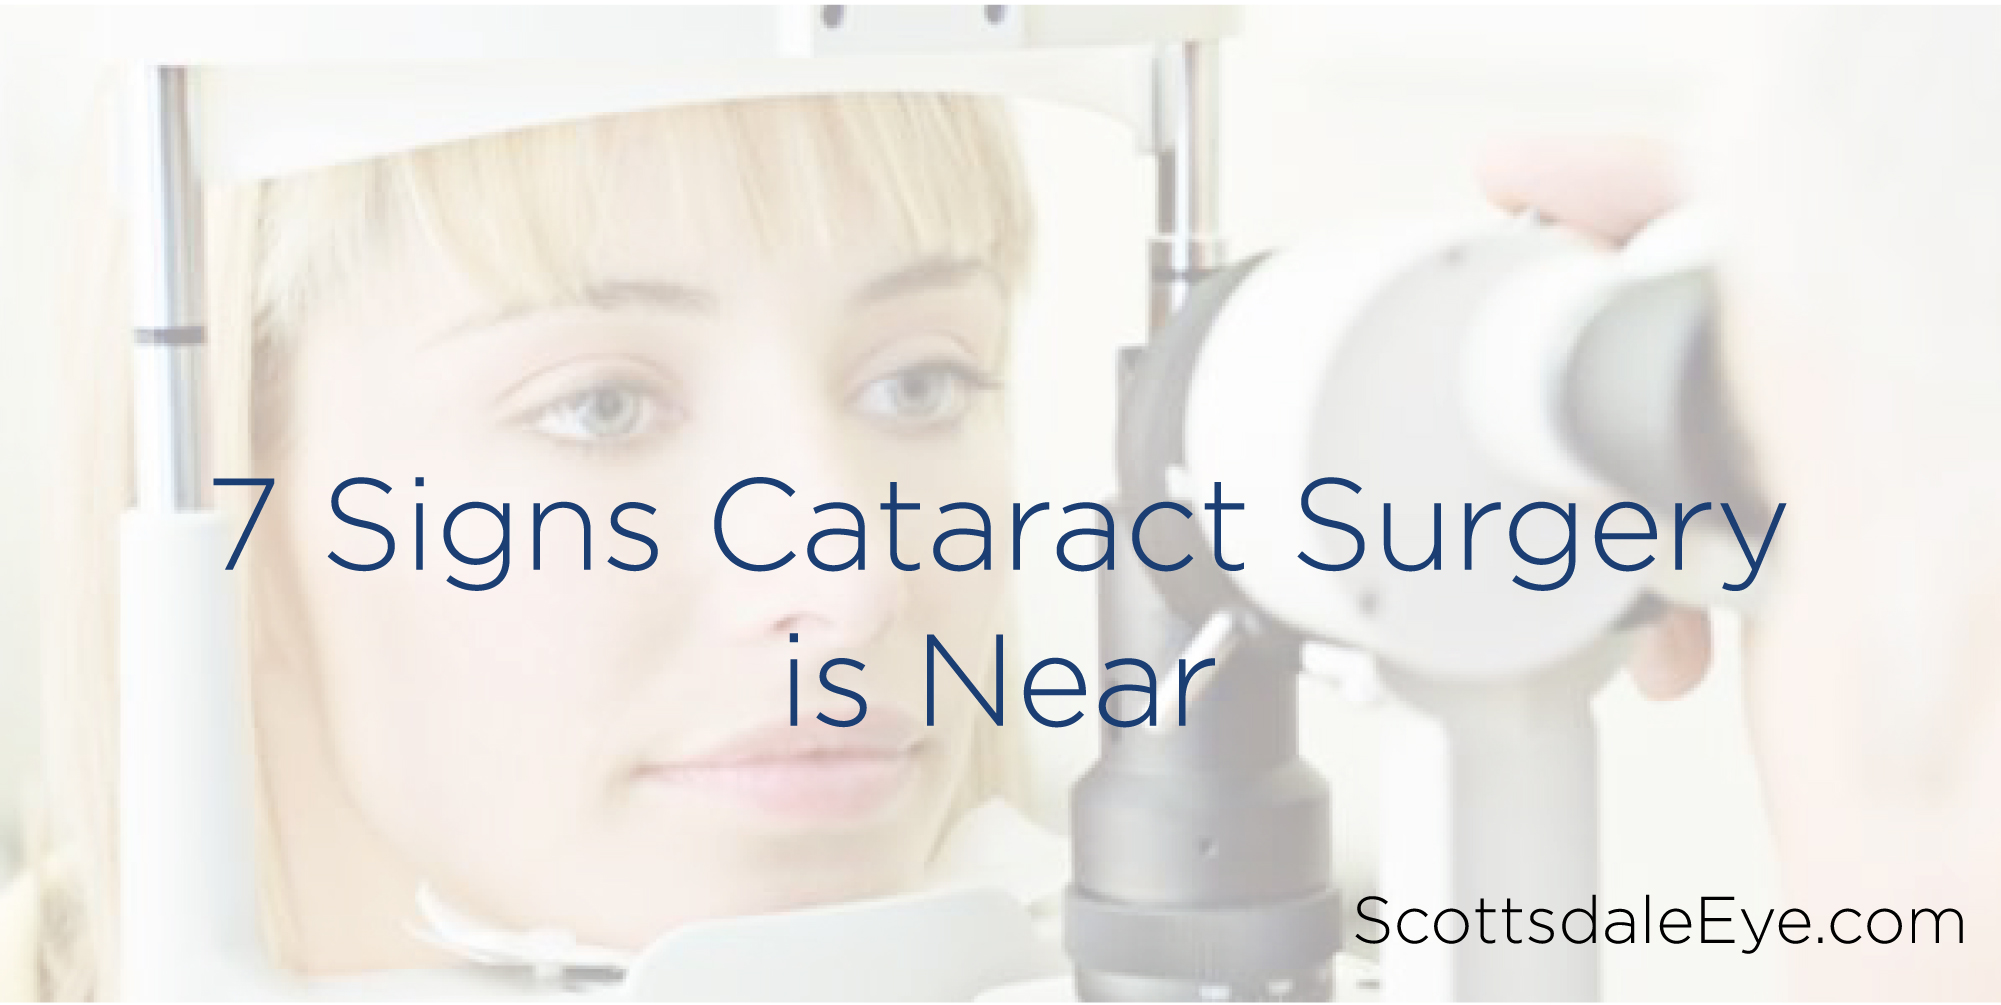 7 Signs Cataract Surgery Is Near